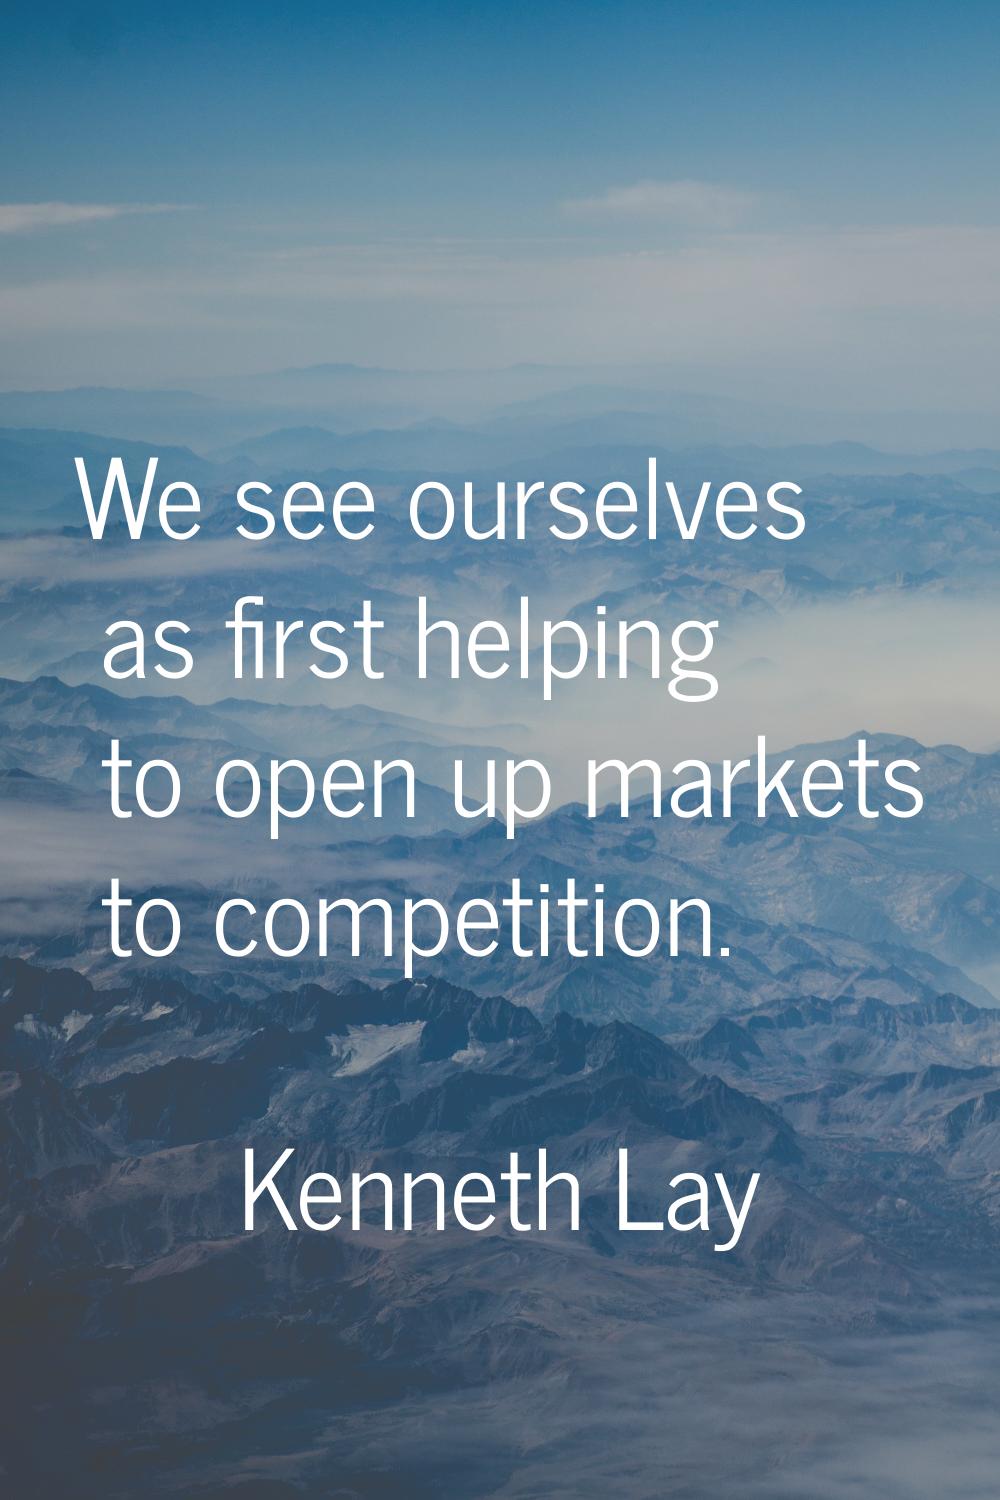 We see ourselves as first helping to open up markets to competition.